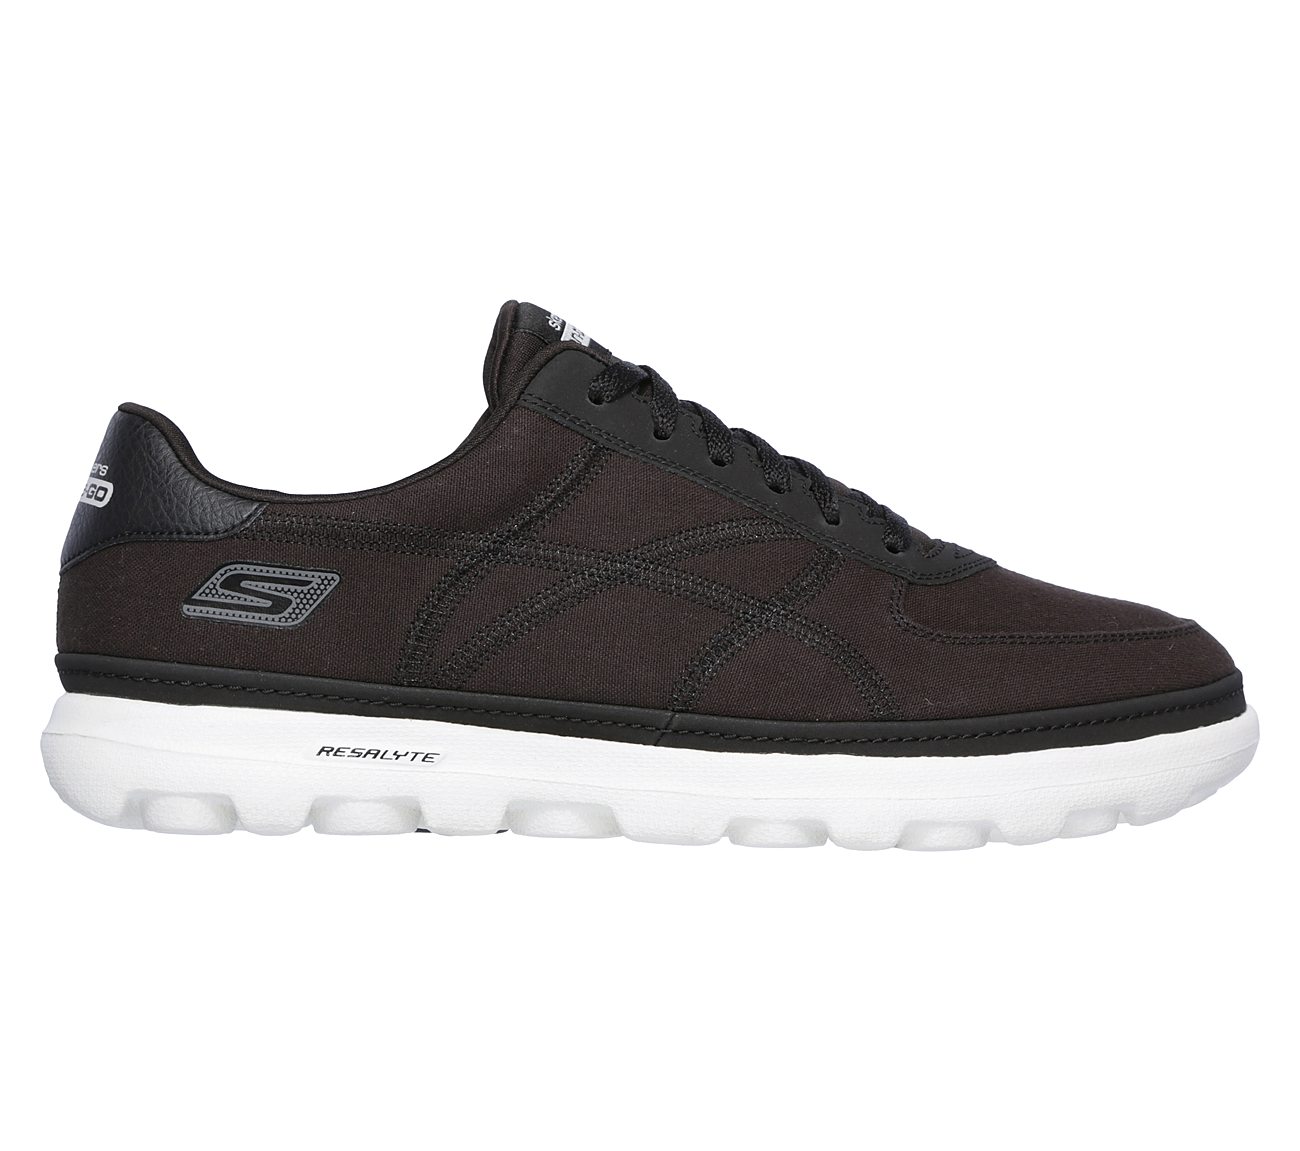 Clever Skechers Performance Shoes